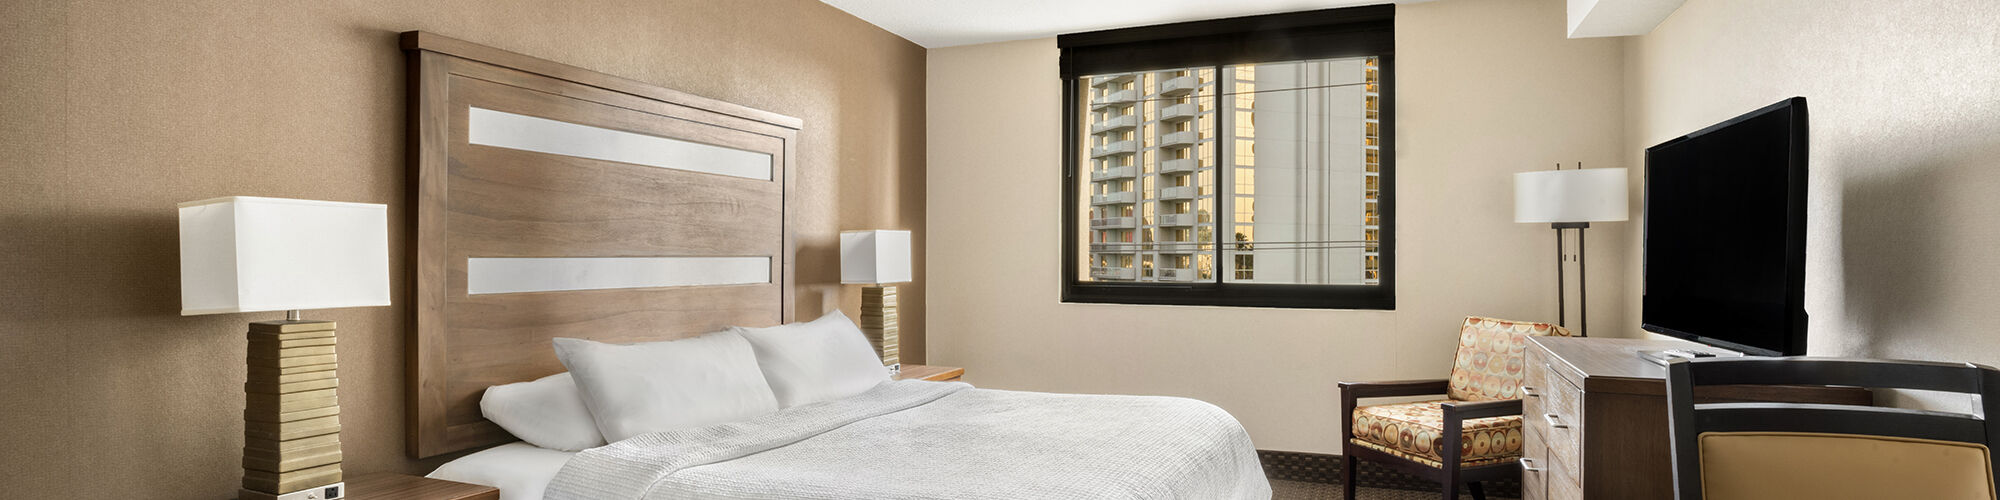 The image shows a hotel room with a neatly made bed, two bedside tables with lamps, a TV, a chair, a dresser, and a window with a city view.